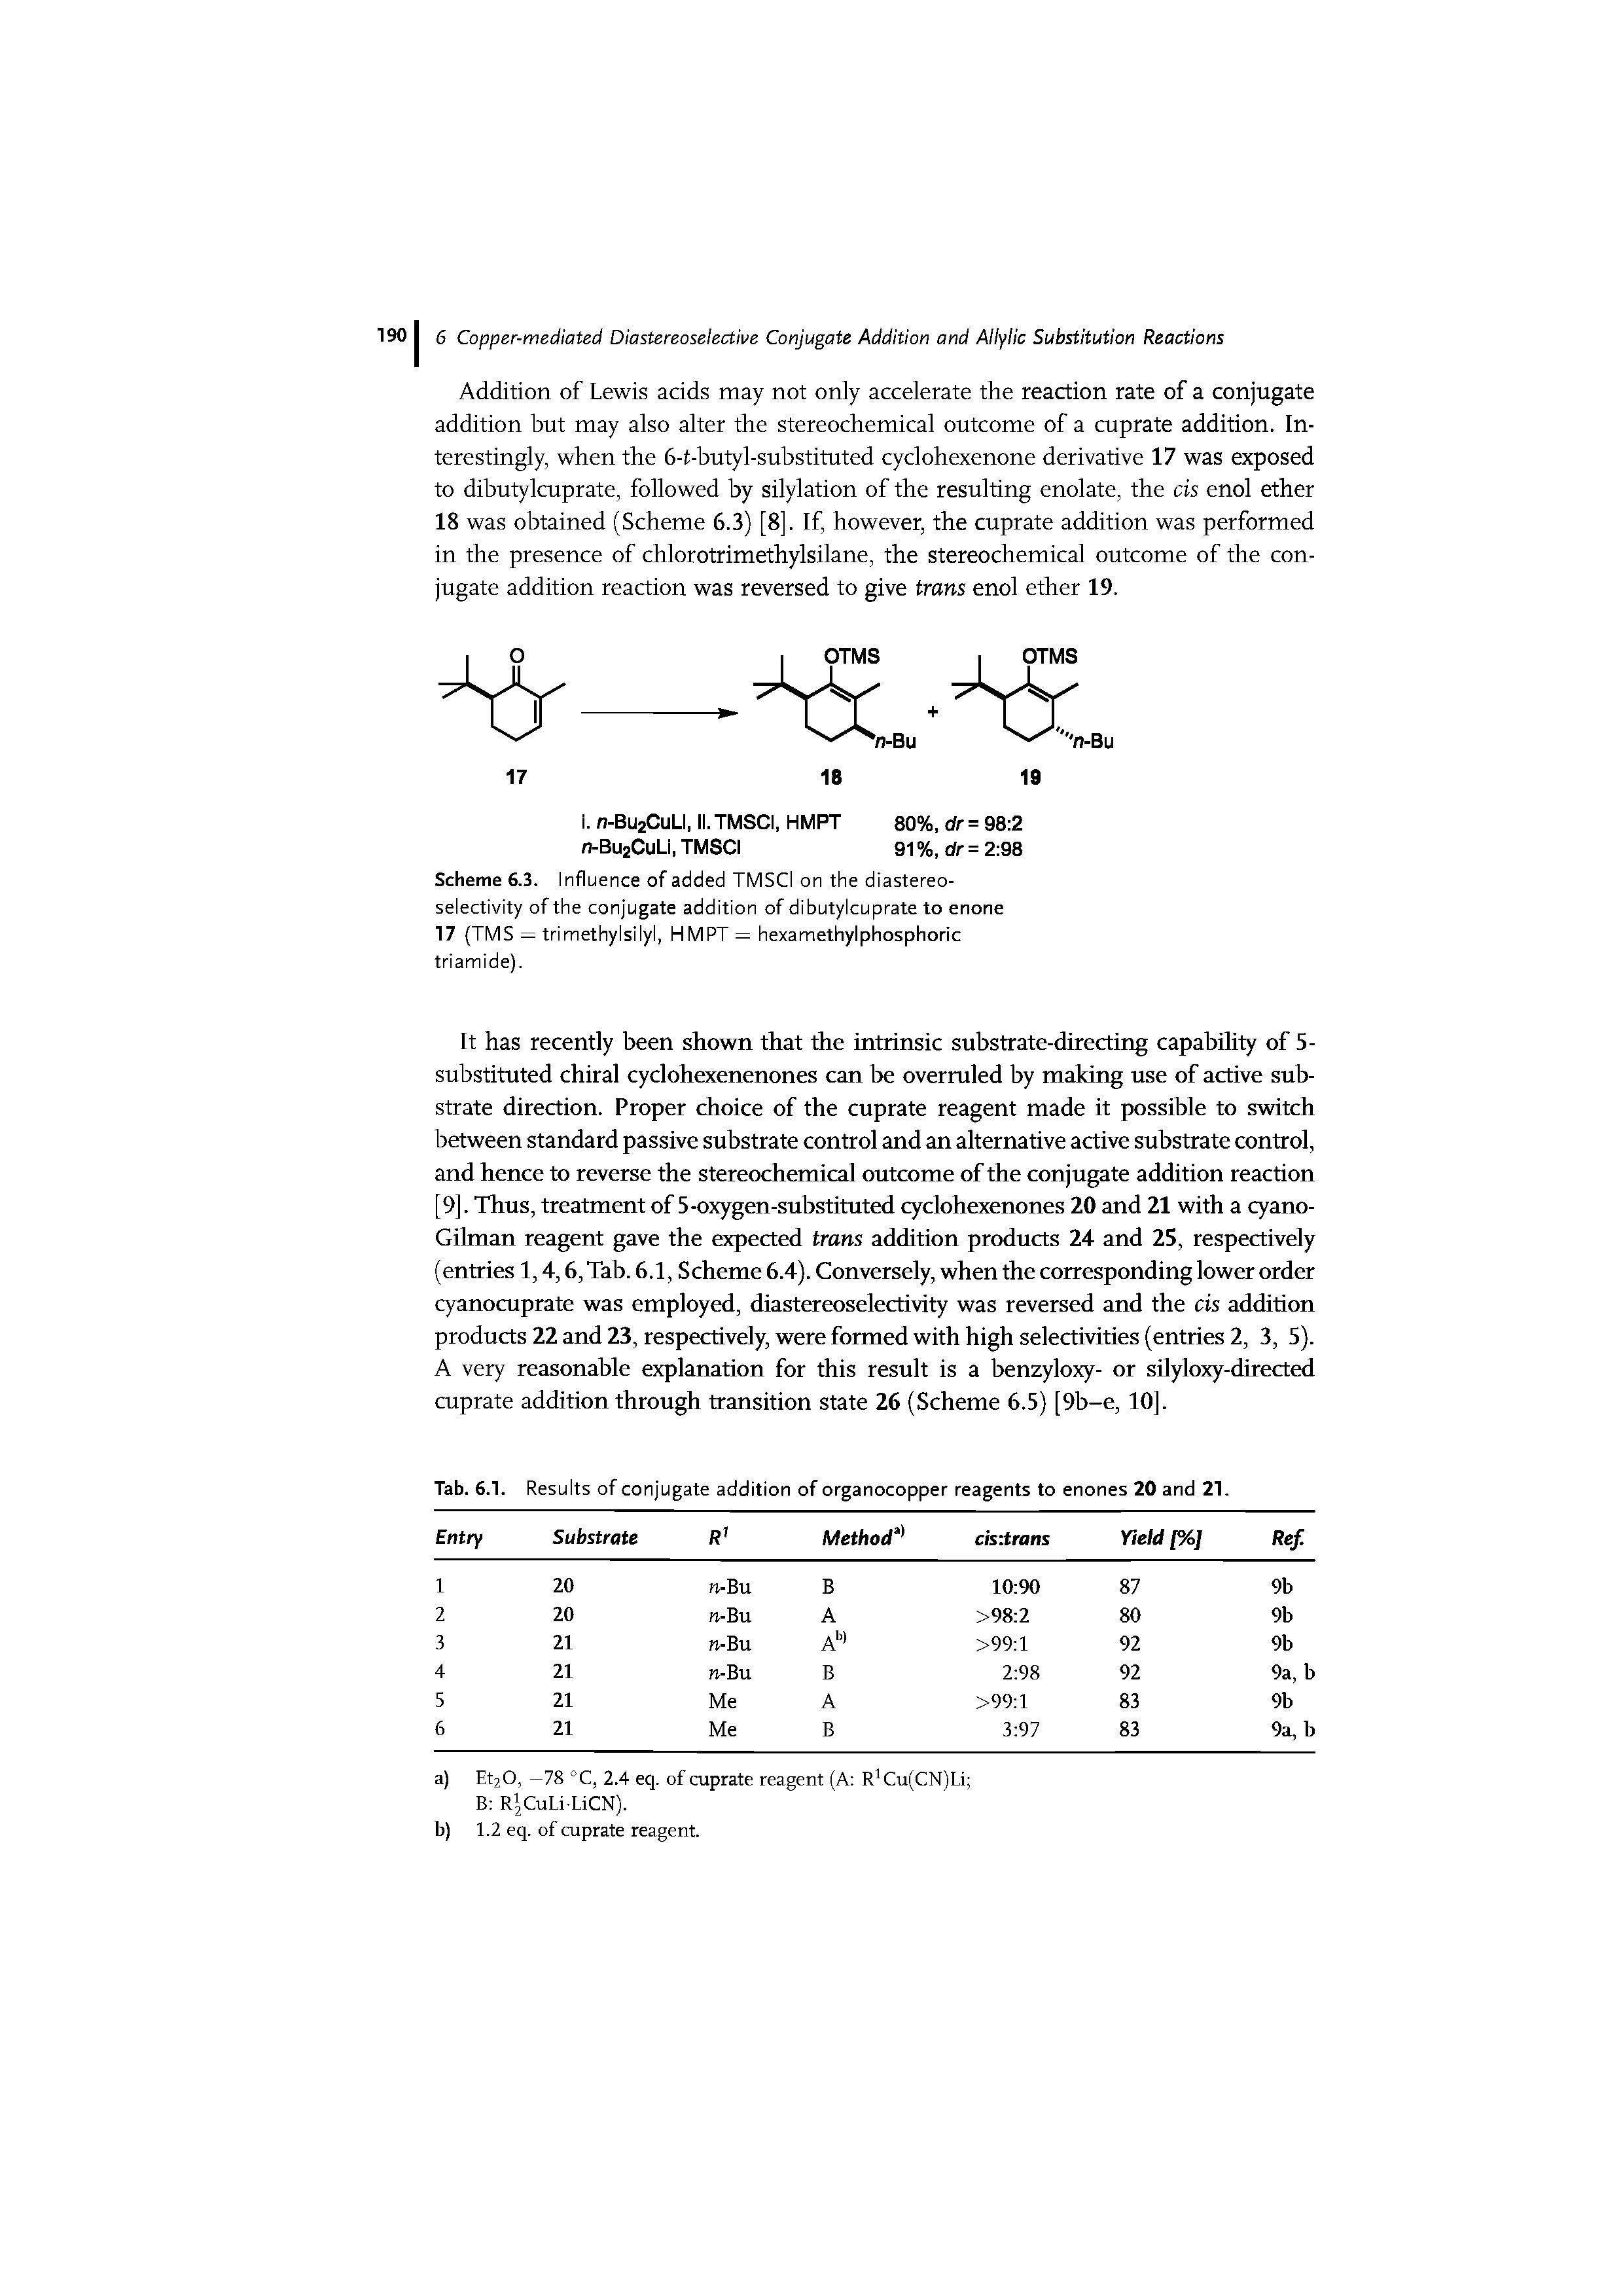 Scheme 6.3. Influence of added TMSCI on the diastereo-selectivity of the conjugate addition of dibutylcuprate to enone 17 (TMS = trimethylsilyl, HMPT = hexamethylphosphoric triamide).